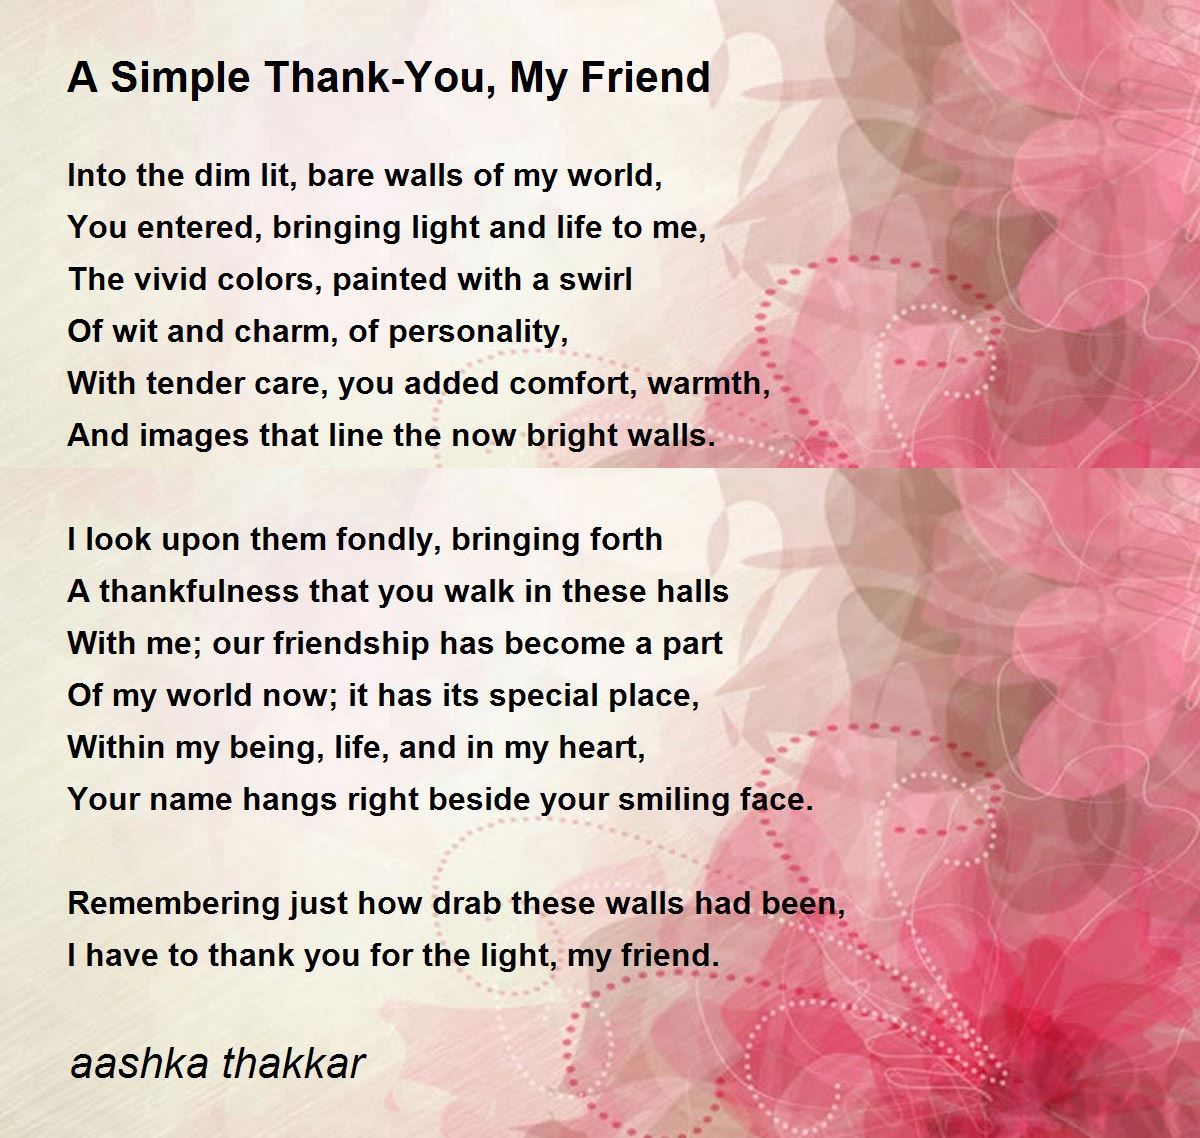 A Simple Thank-You, My Friend - A Simple Thank-You, My Friend Poem ...